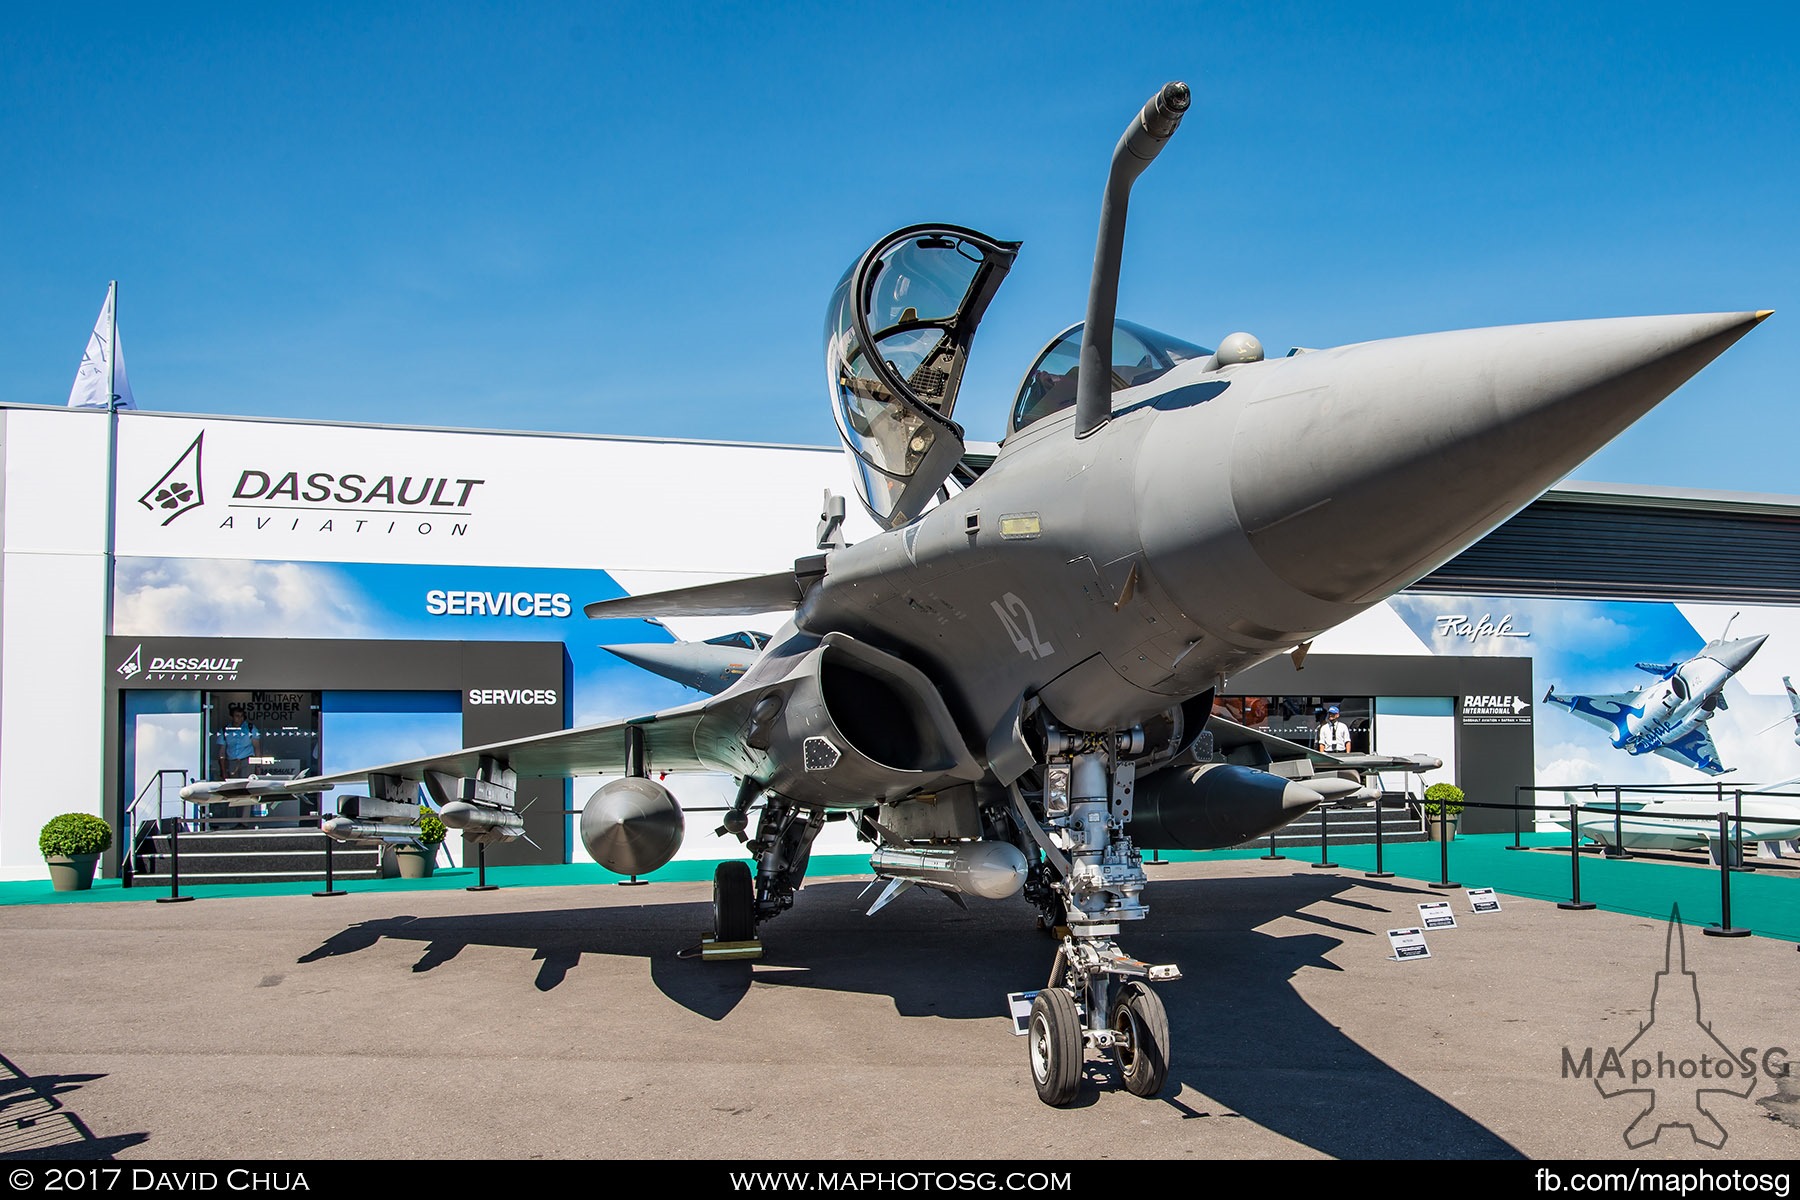 11. Static Display of the Dassault Aviation Rafale C fighter loaded with missiles and fuel tanks.